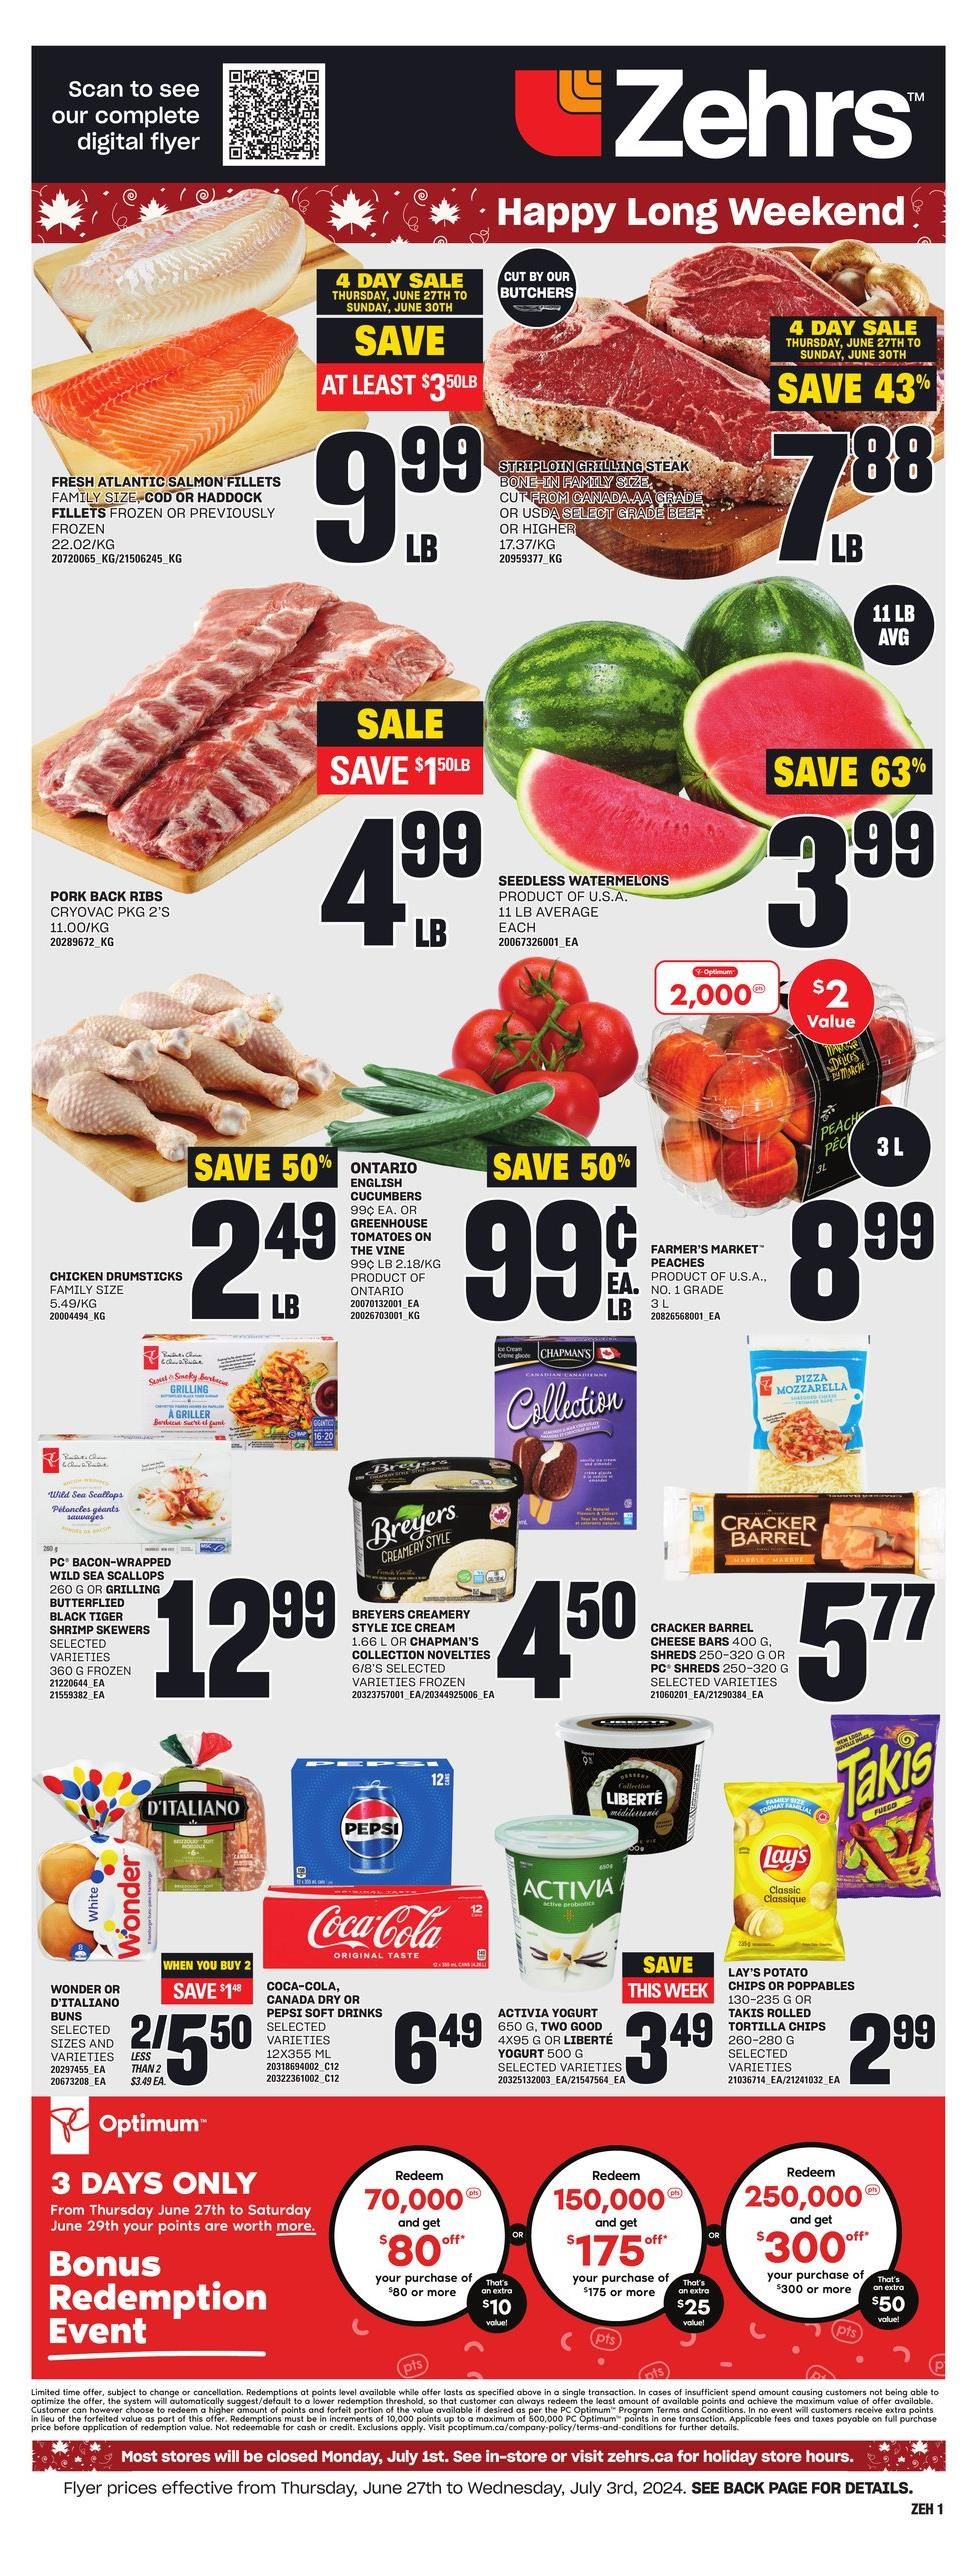 Zehrs - Weekly Flyer Specials - Page 1